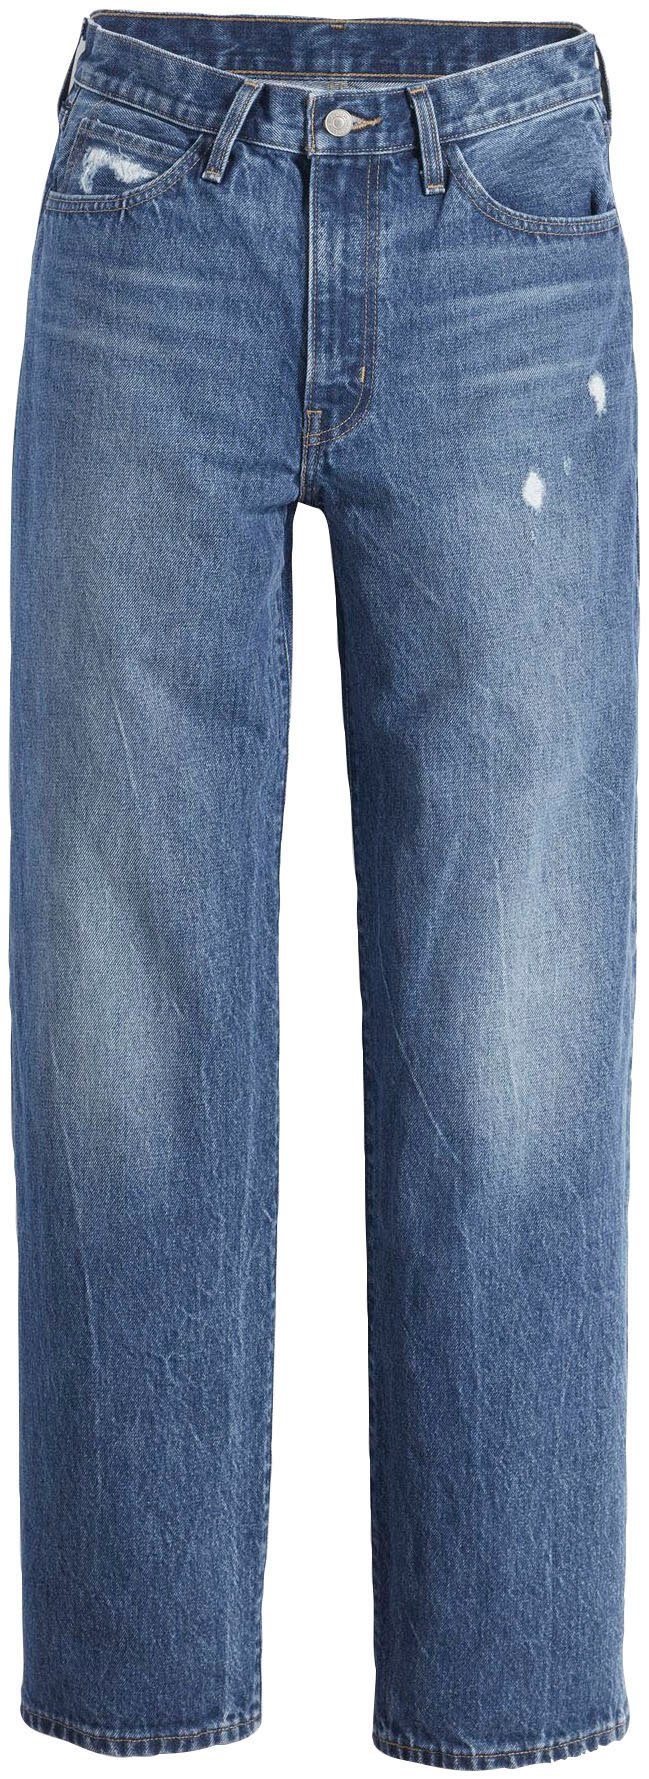 Levi's® Gerade Jeans MIDDY used STRAIGHT blue